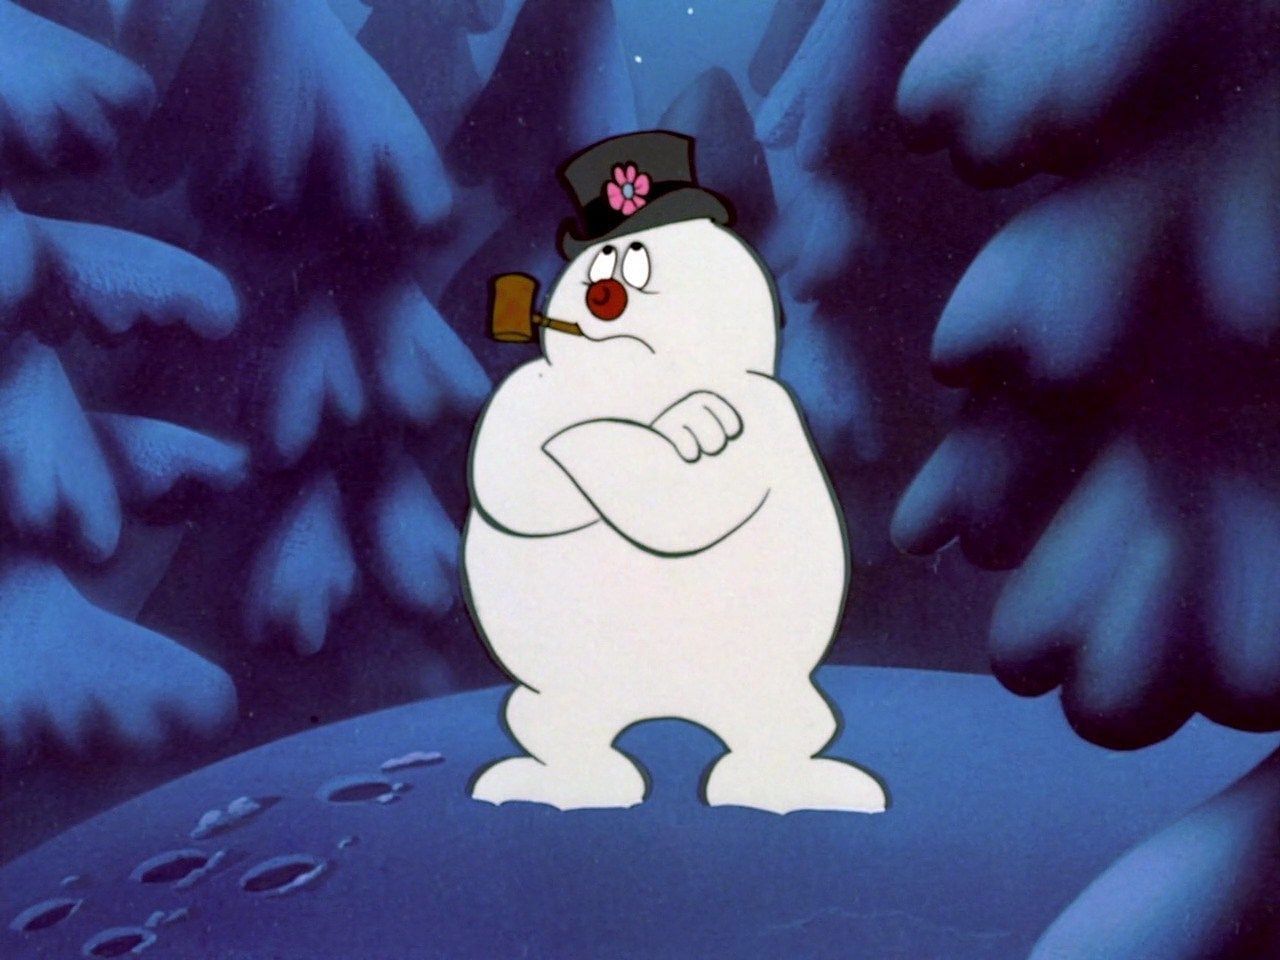 Frosty the Snowman, iconic winter character. (Image via IMDb)